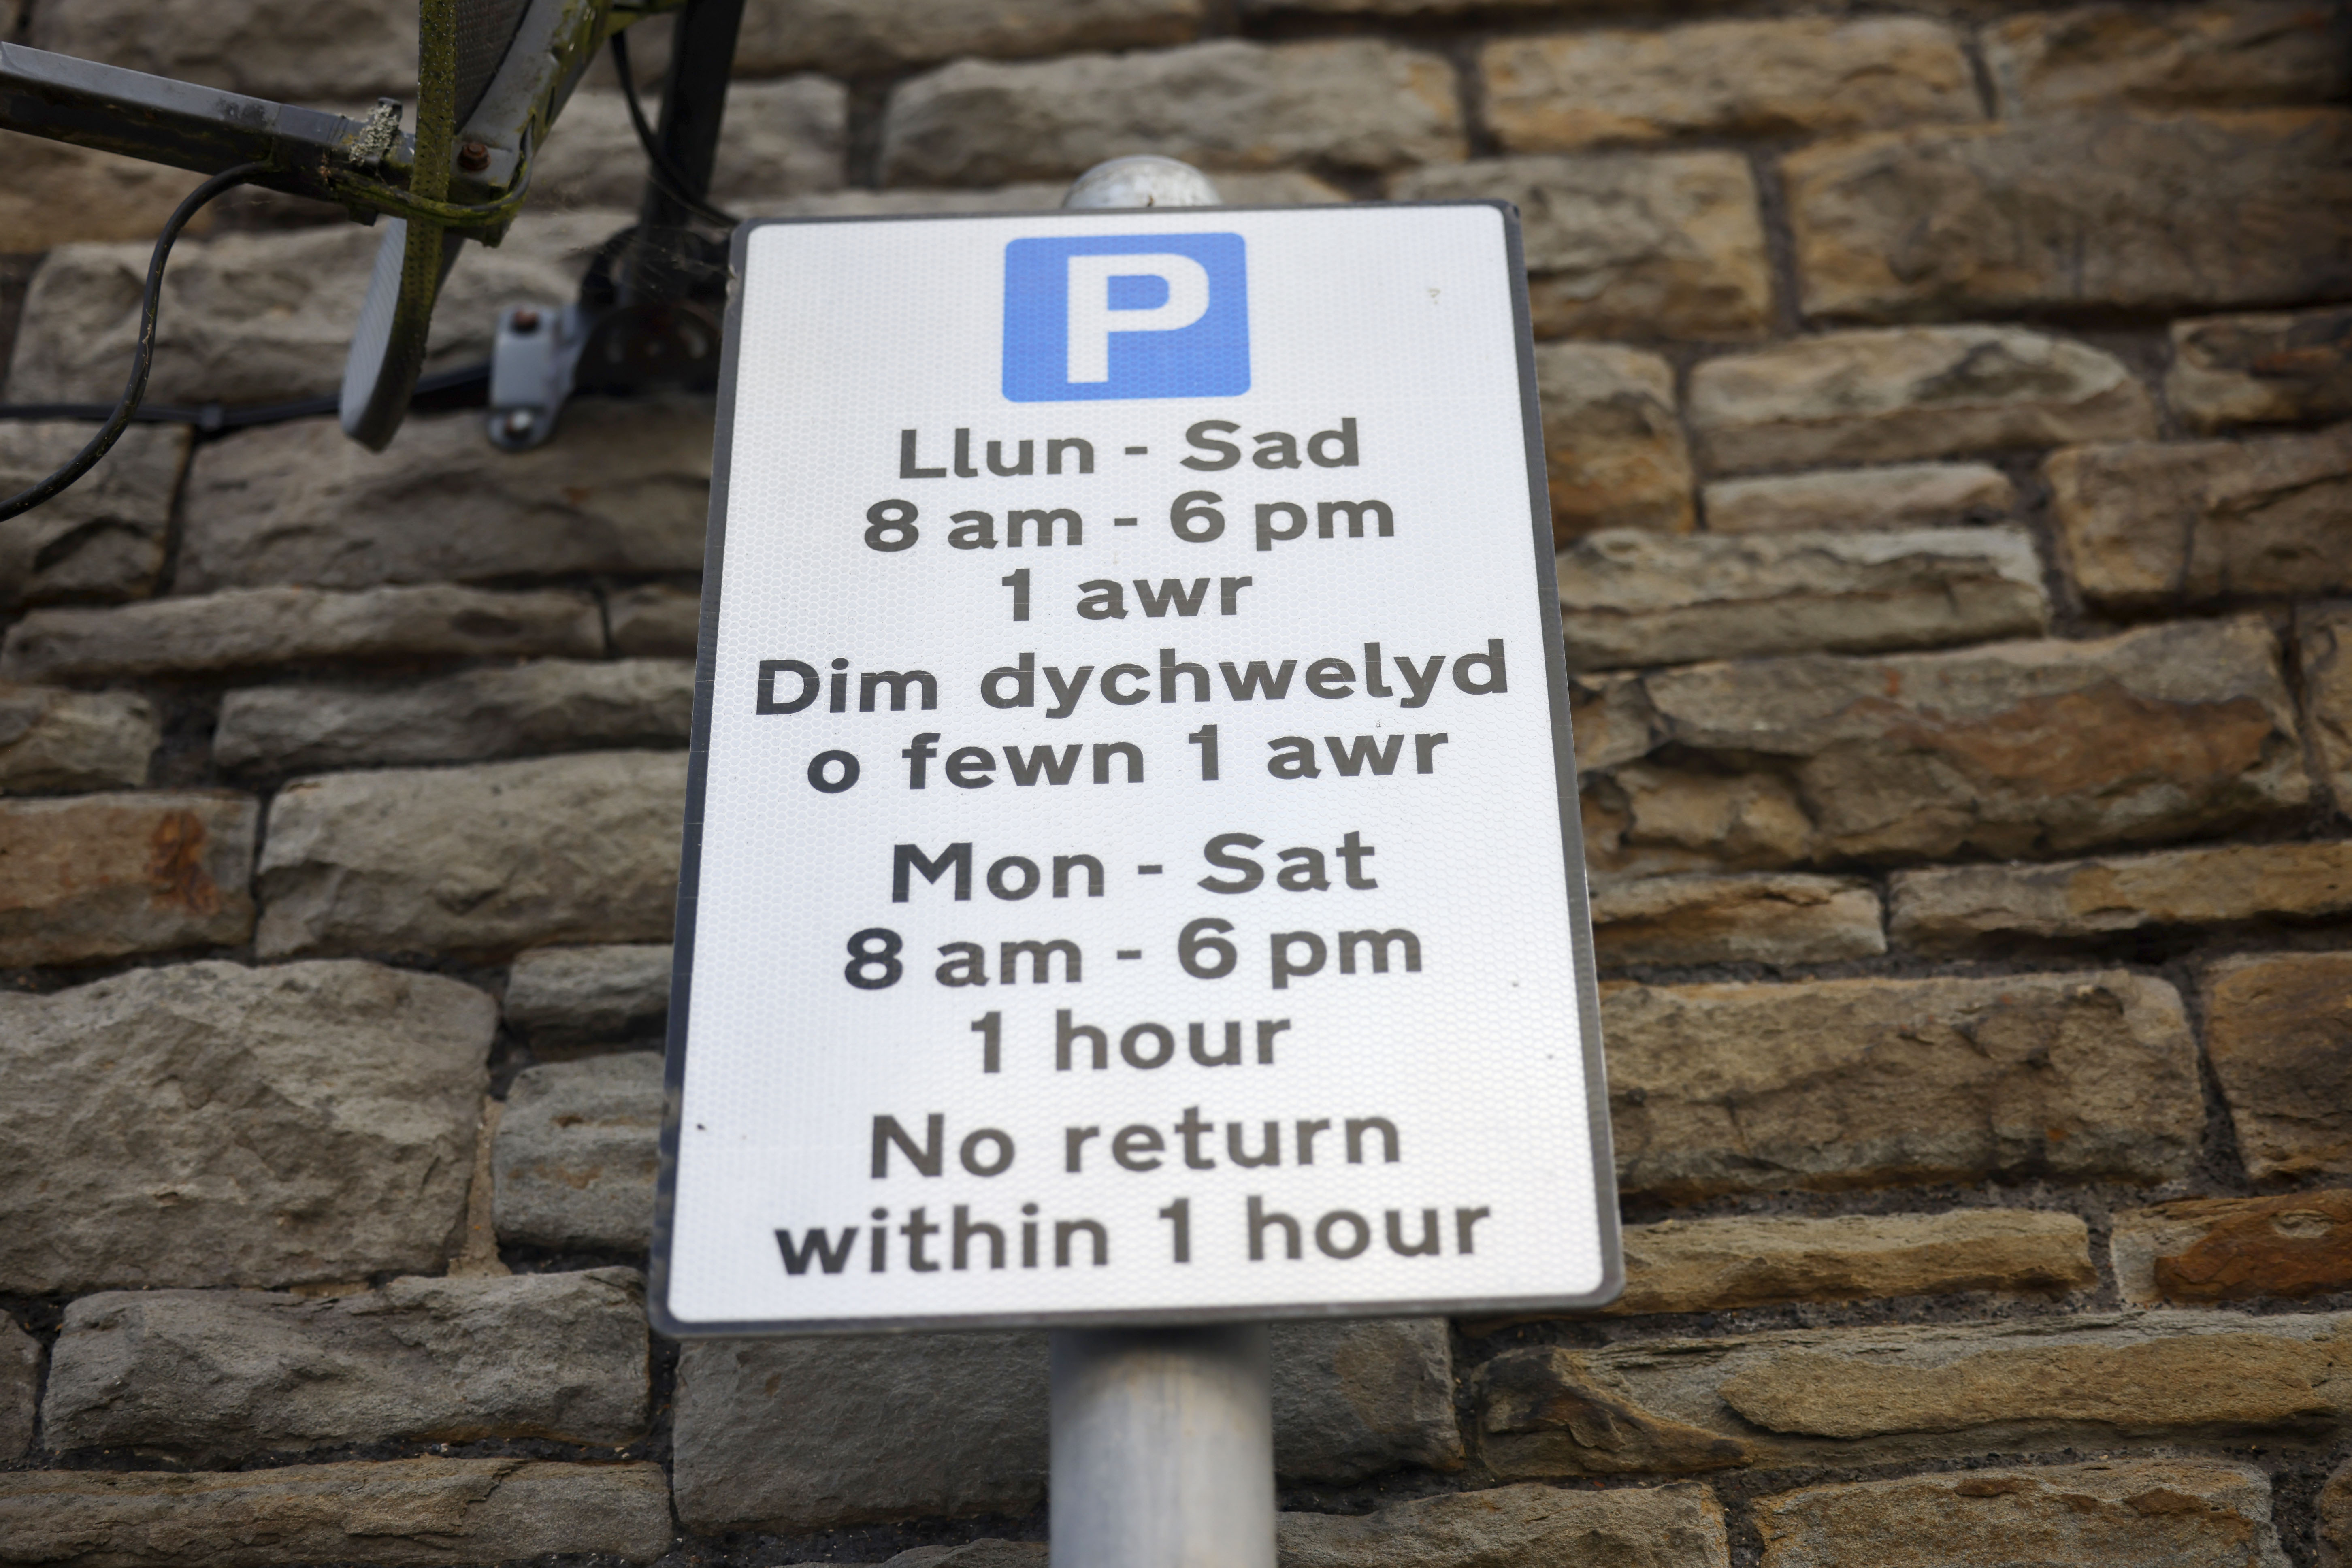 Signage indicating the parking rules for one side of the street